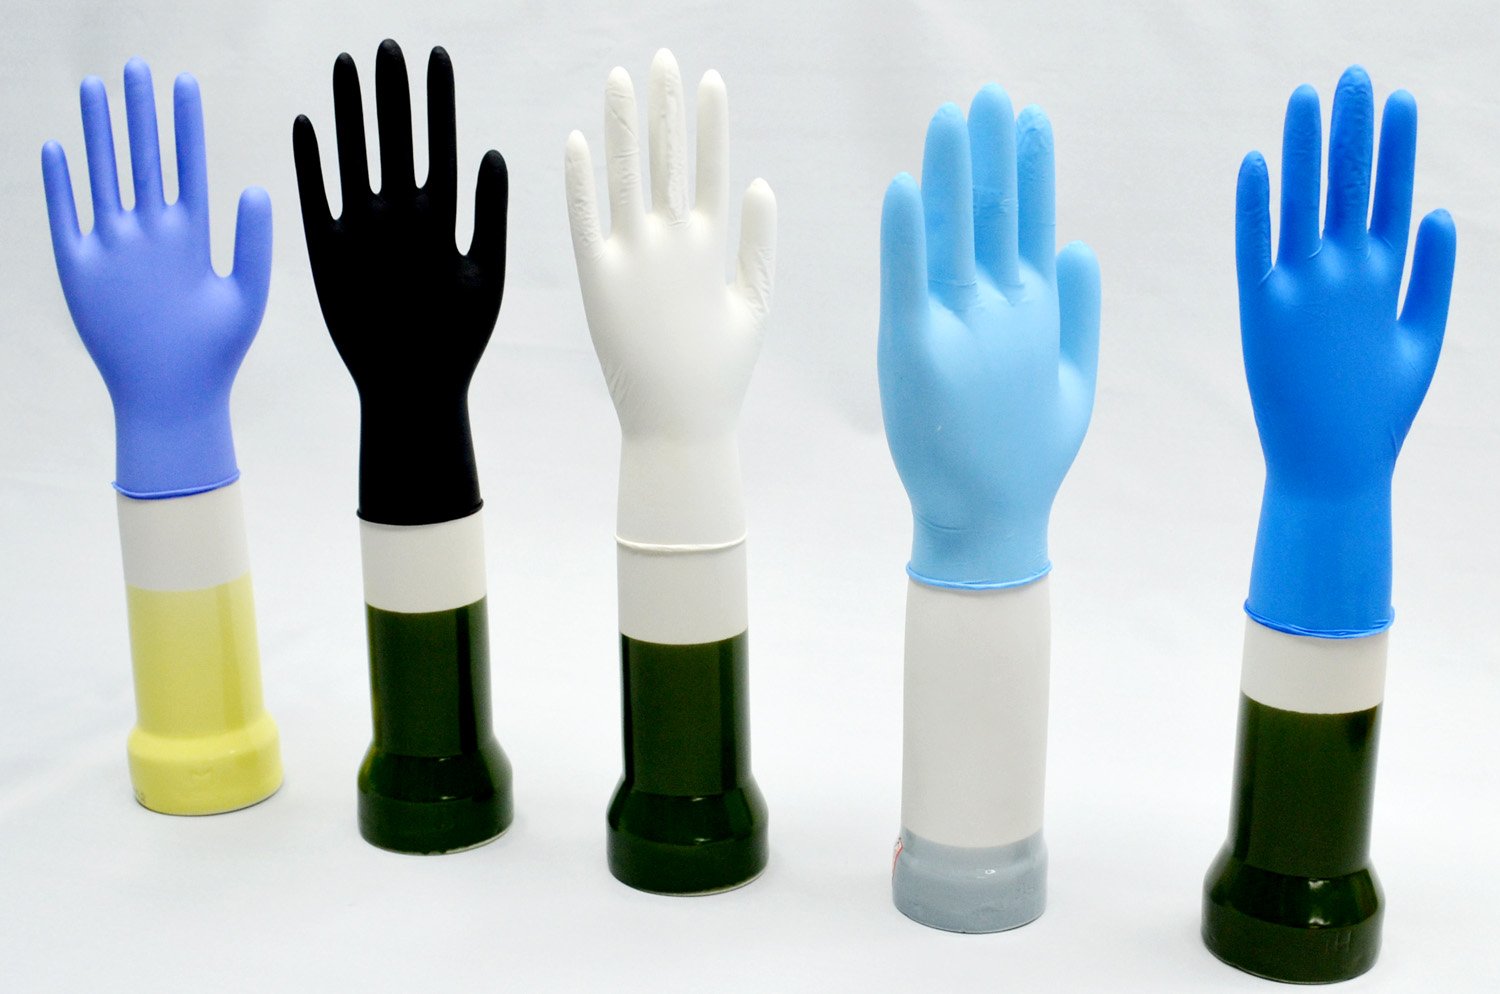 Medical and Industrial-Grade Disposable Nitrile Glove: What's the Difference?